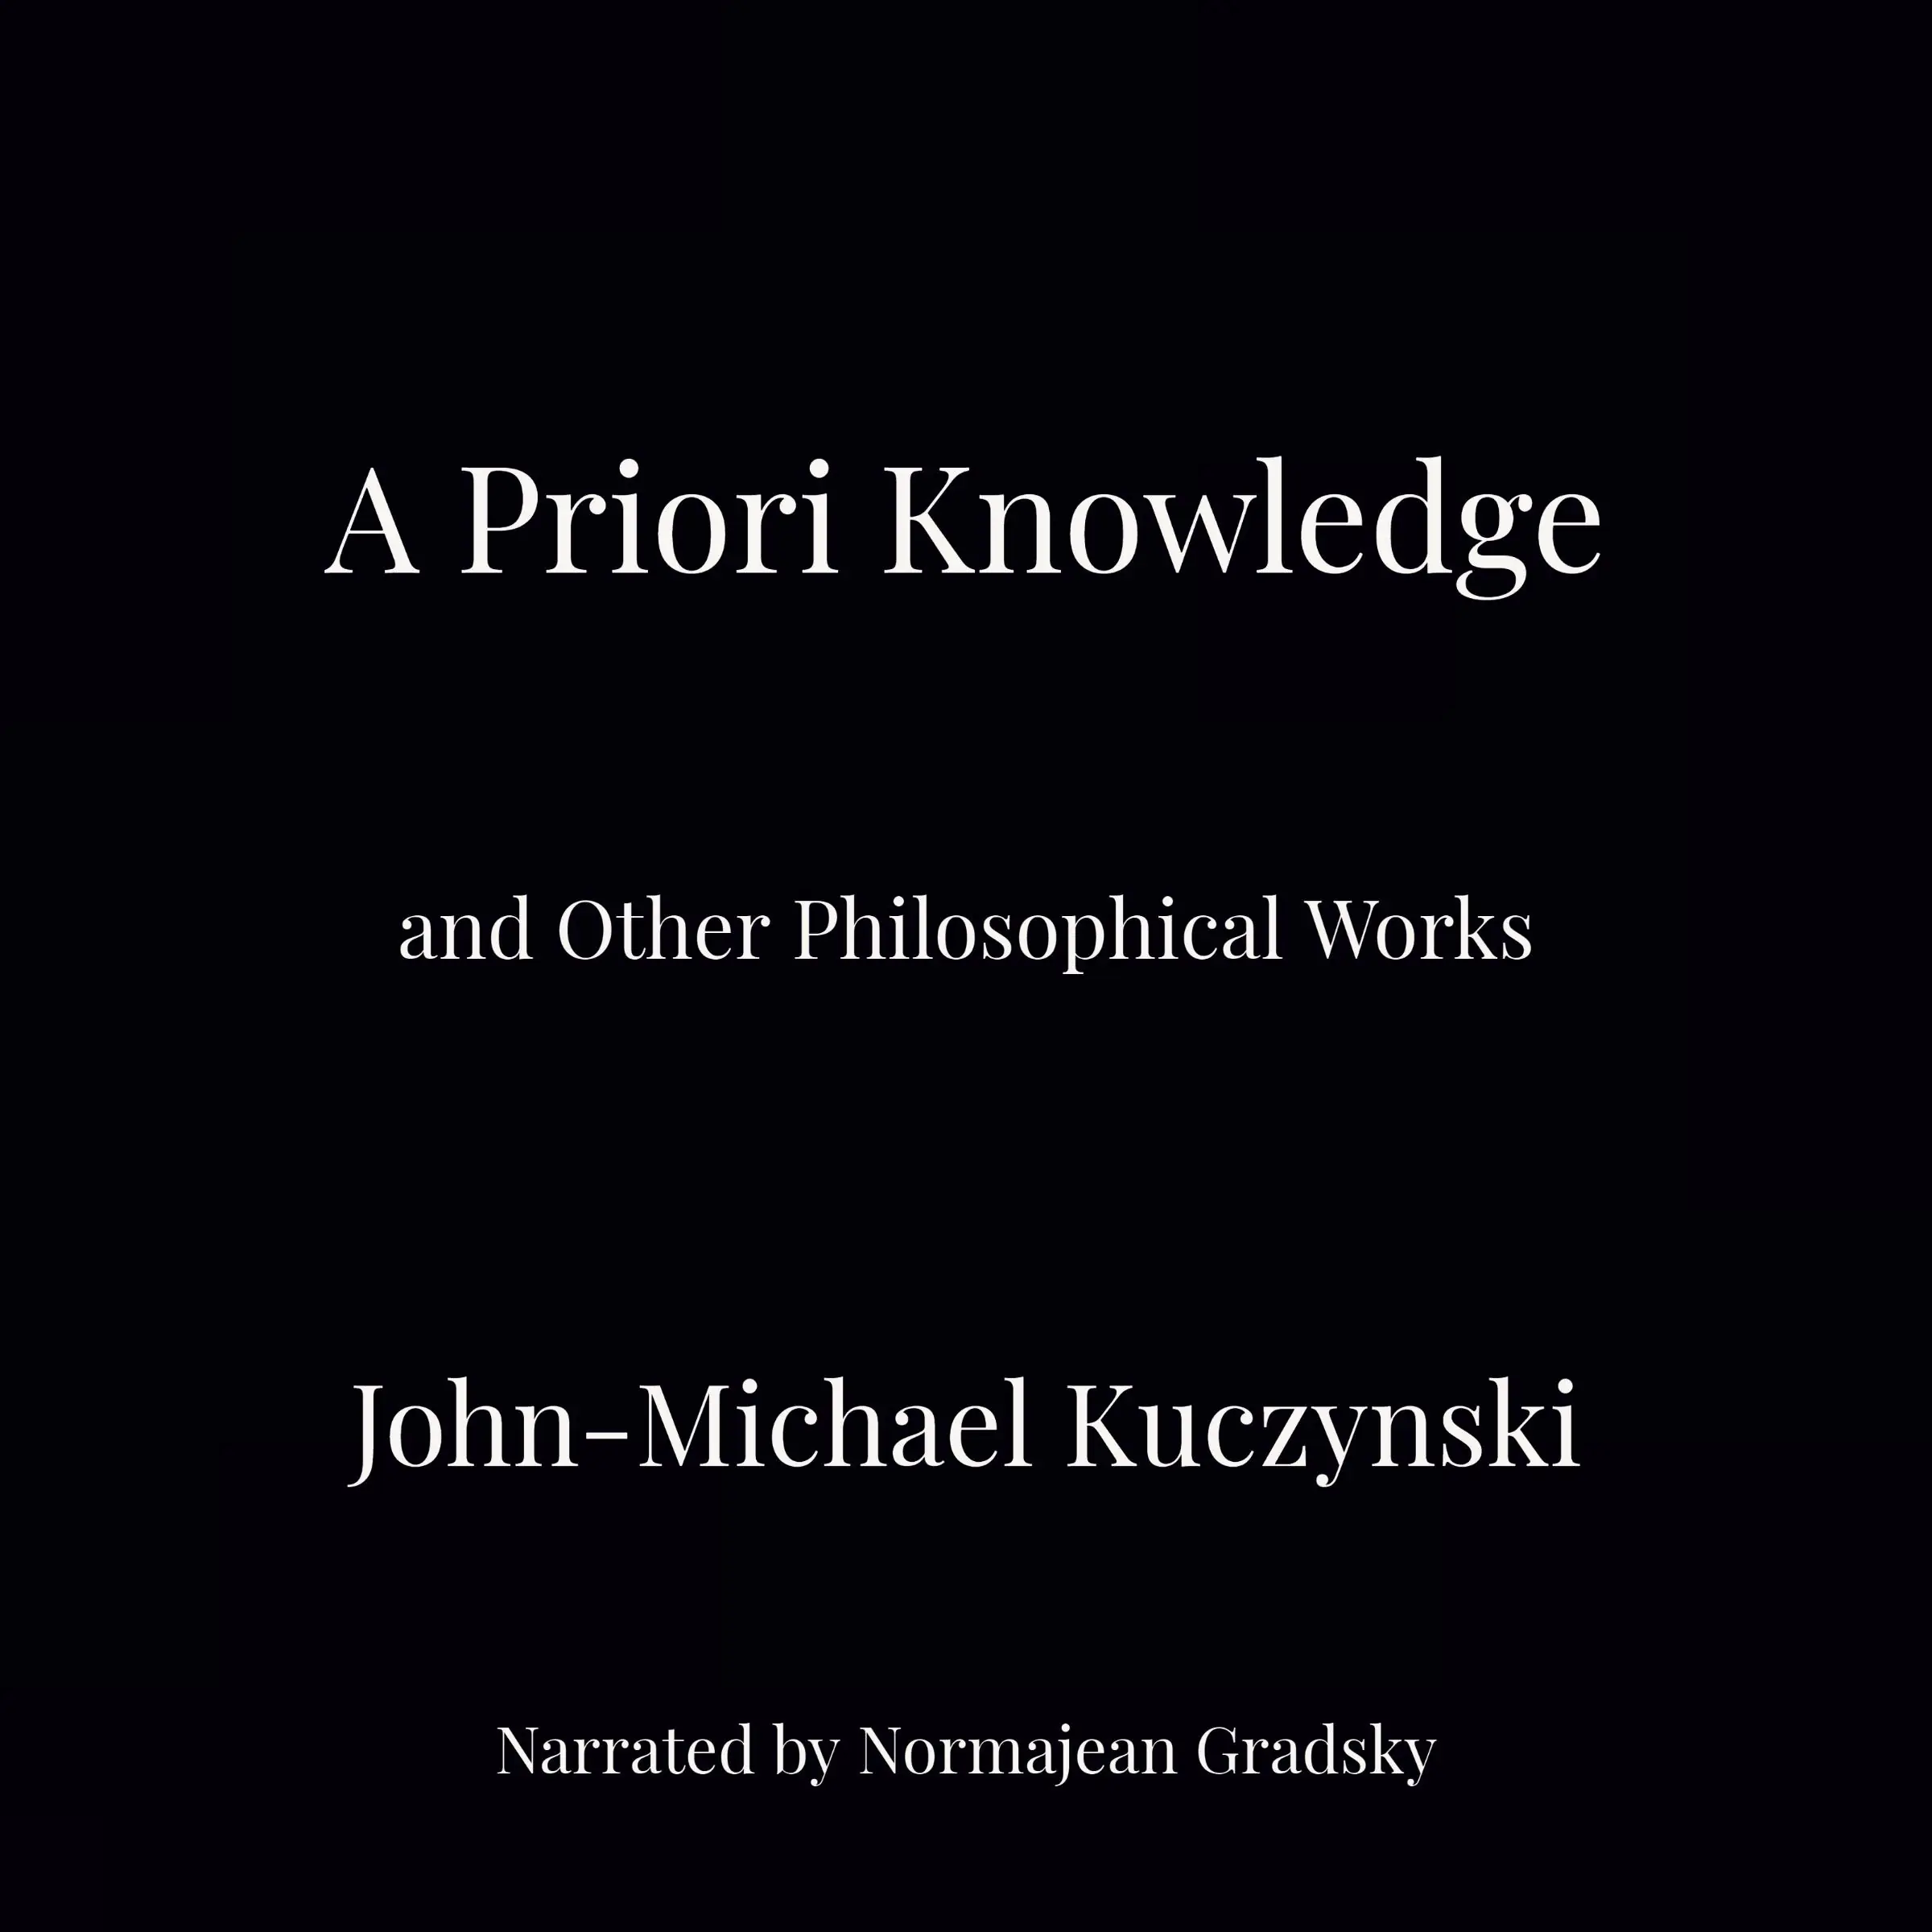 A Priori Knowledge and Other Philosophical Works Audiobook by John-Michael Kuczynski